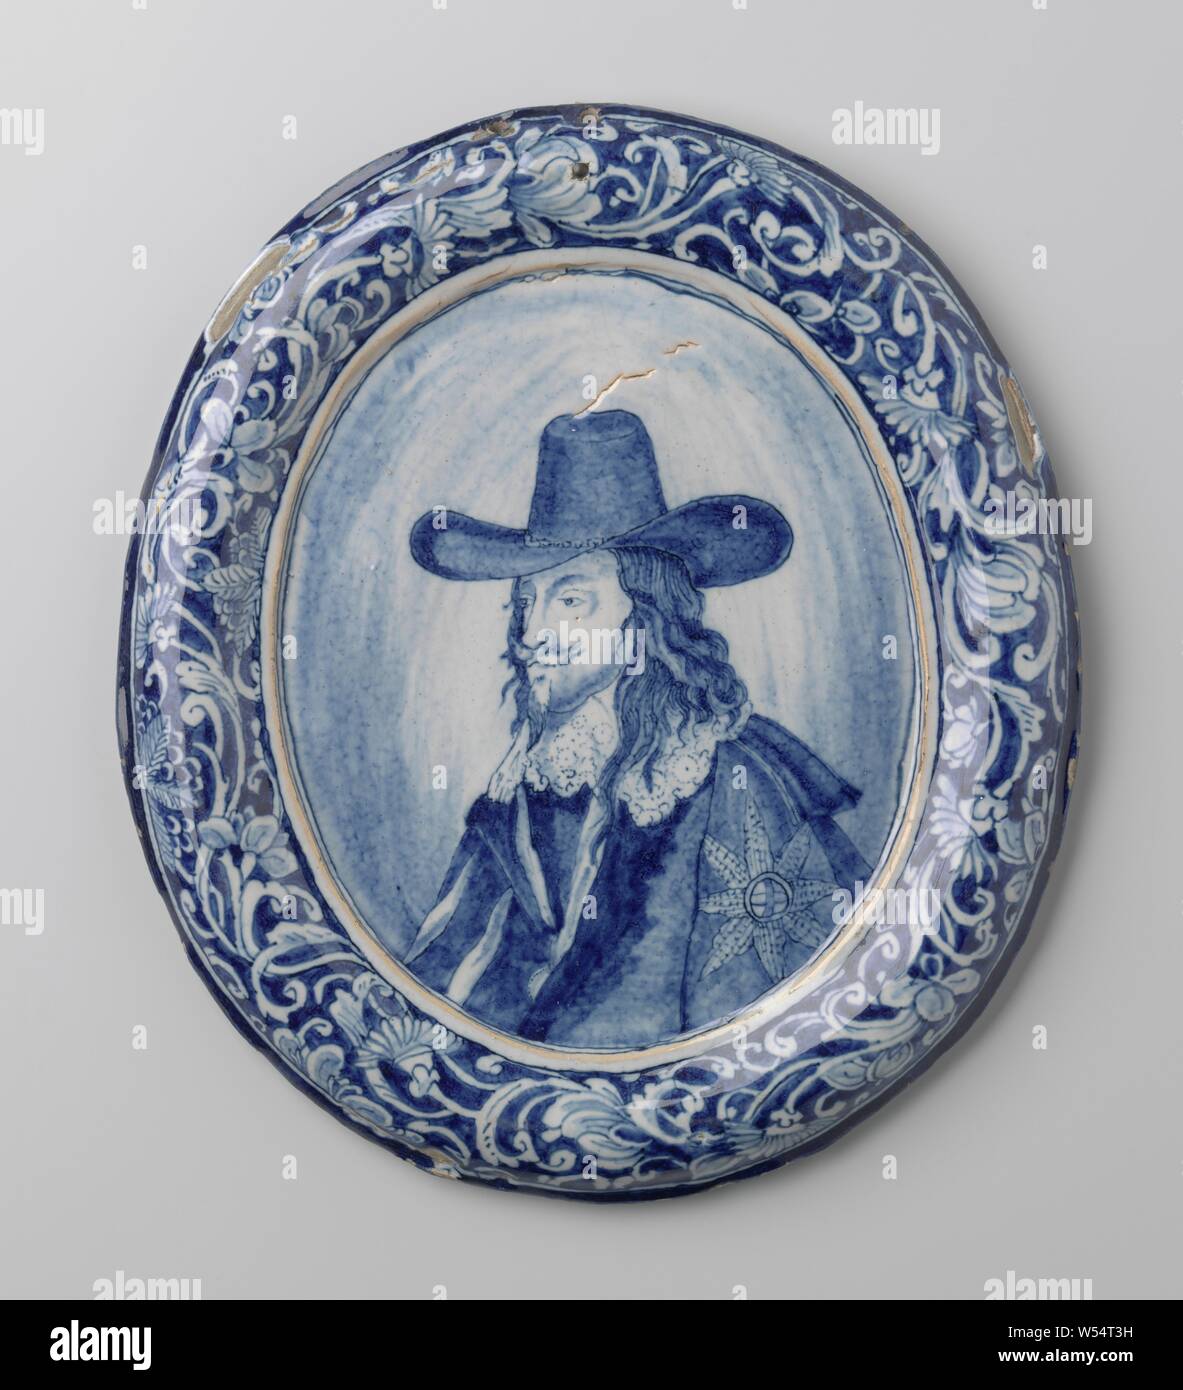 Charles I, King of England, Plaque of Faience. Painted blue with the portrait of Charles I, king of England. Possibly a fake after Dutch or English example. The object is (probably) a FAKE, England, Charles I (King of England), anonymous, Netherlands (possibly), 1720 - 1740 and/or 1830 - 1880, h 23.5 cm Stock Photo